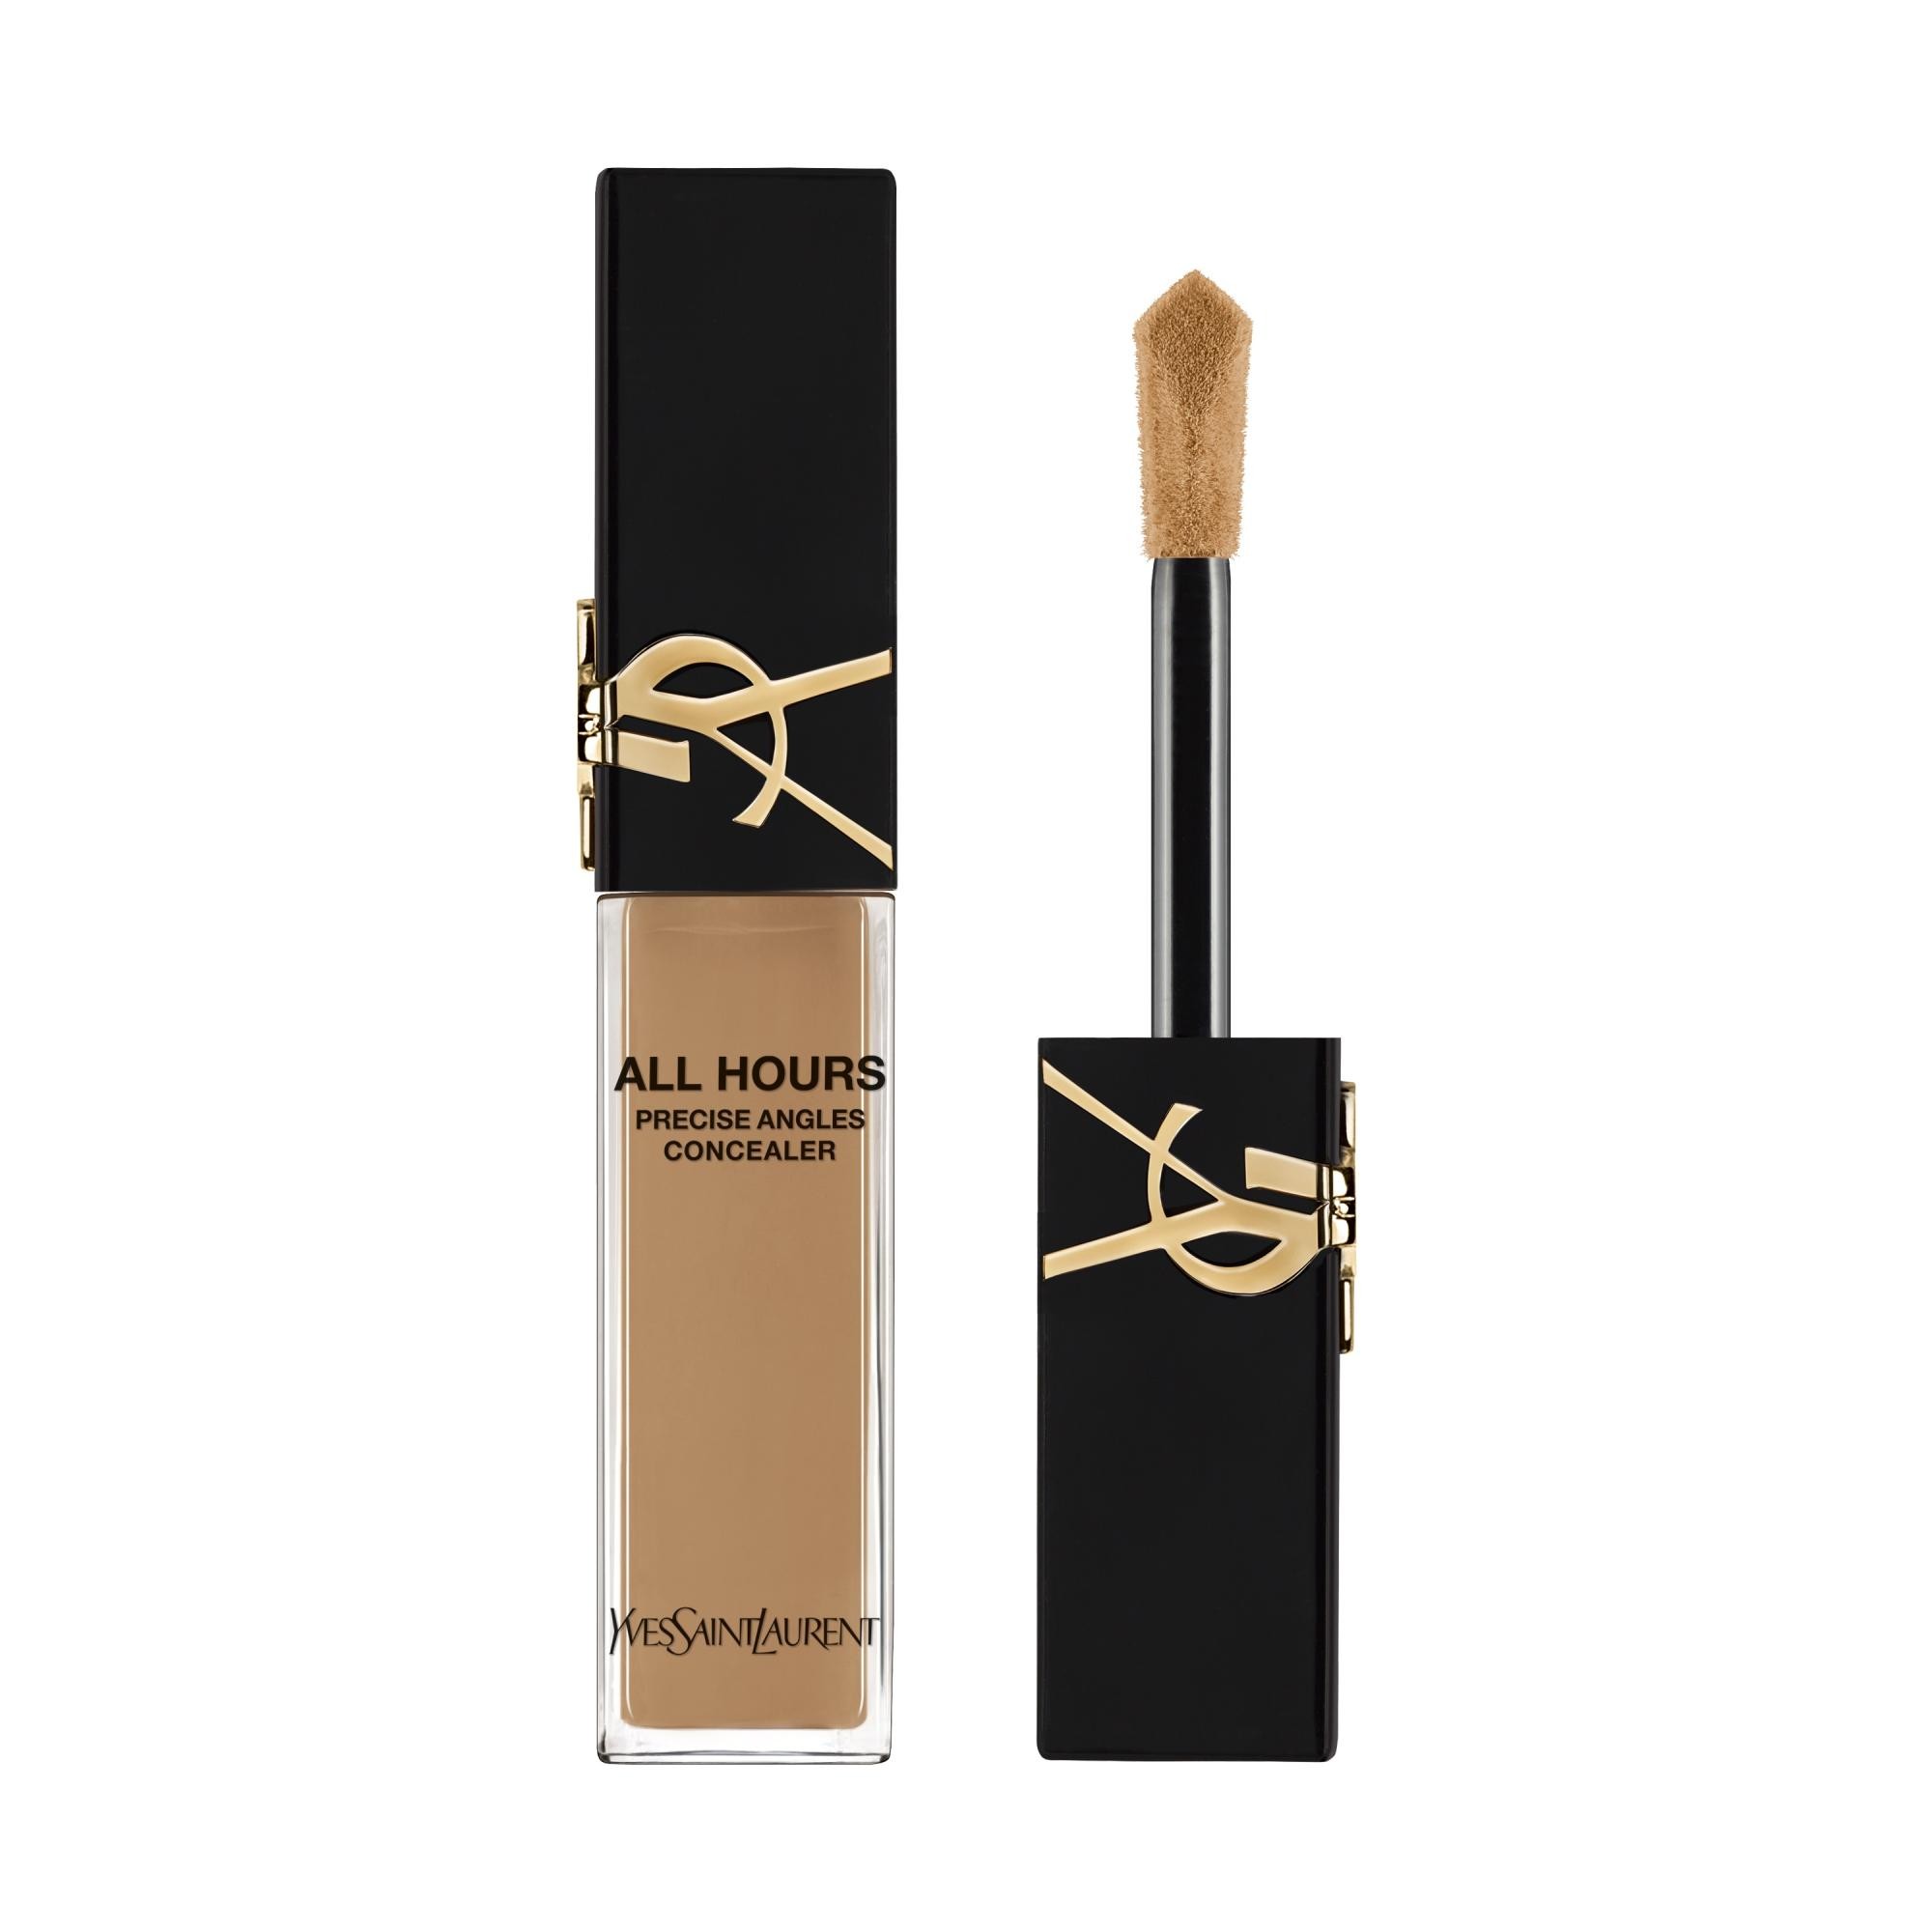 Yves Saint Laurent All Hours Precise Angles Concealer MW9 15ml